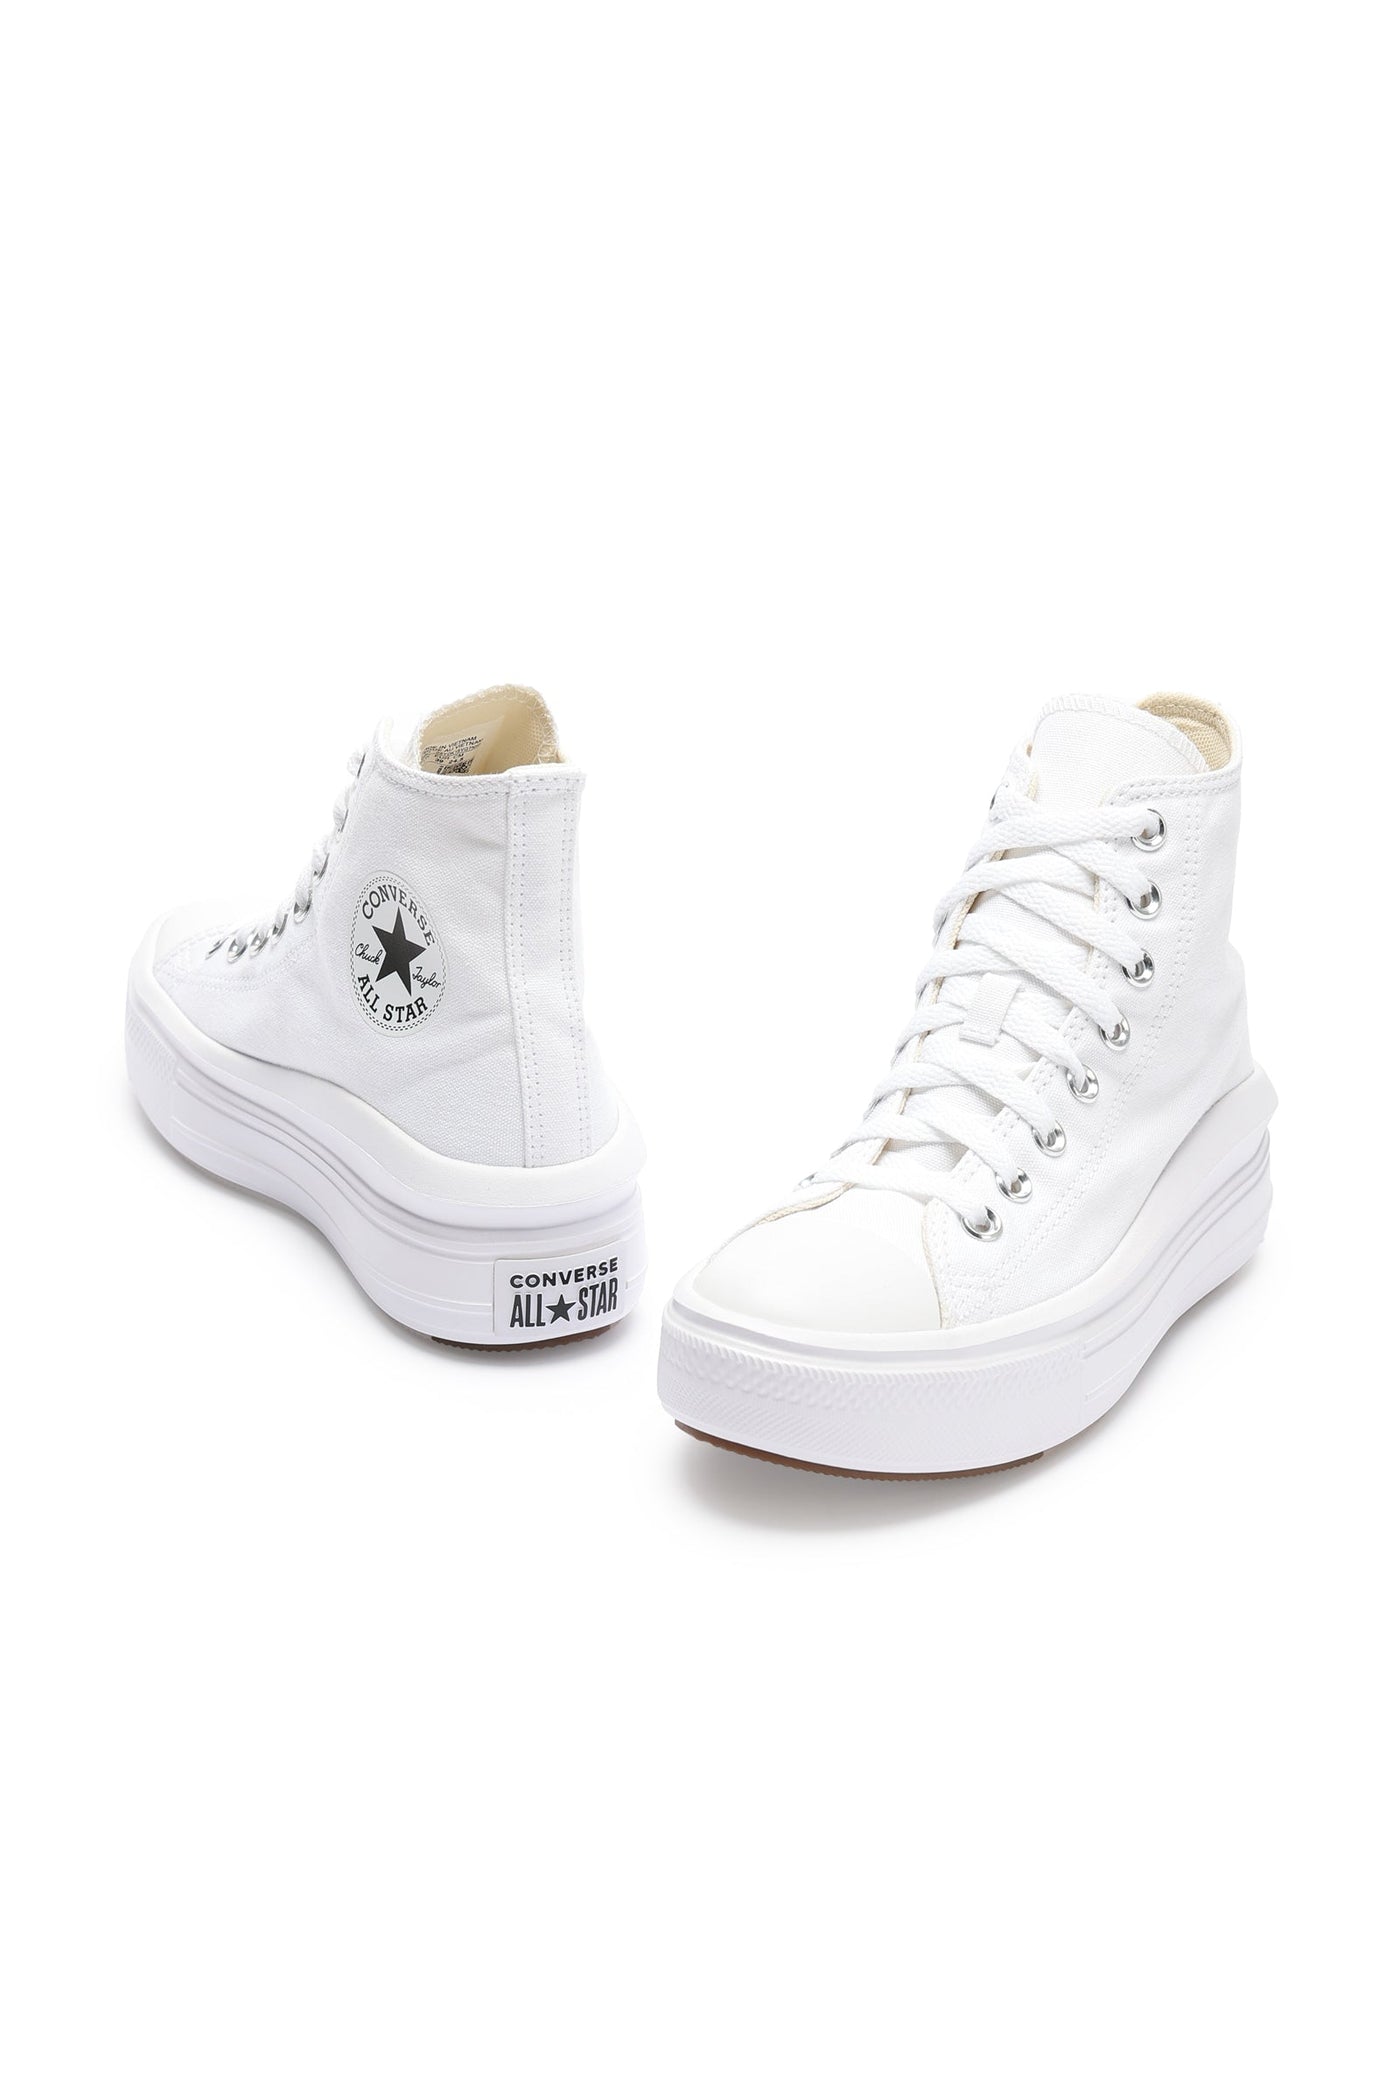 CT AS MOVE CANVAS COLOR Optical White / 39 / Women